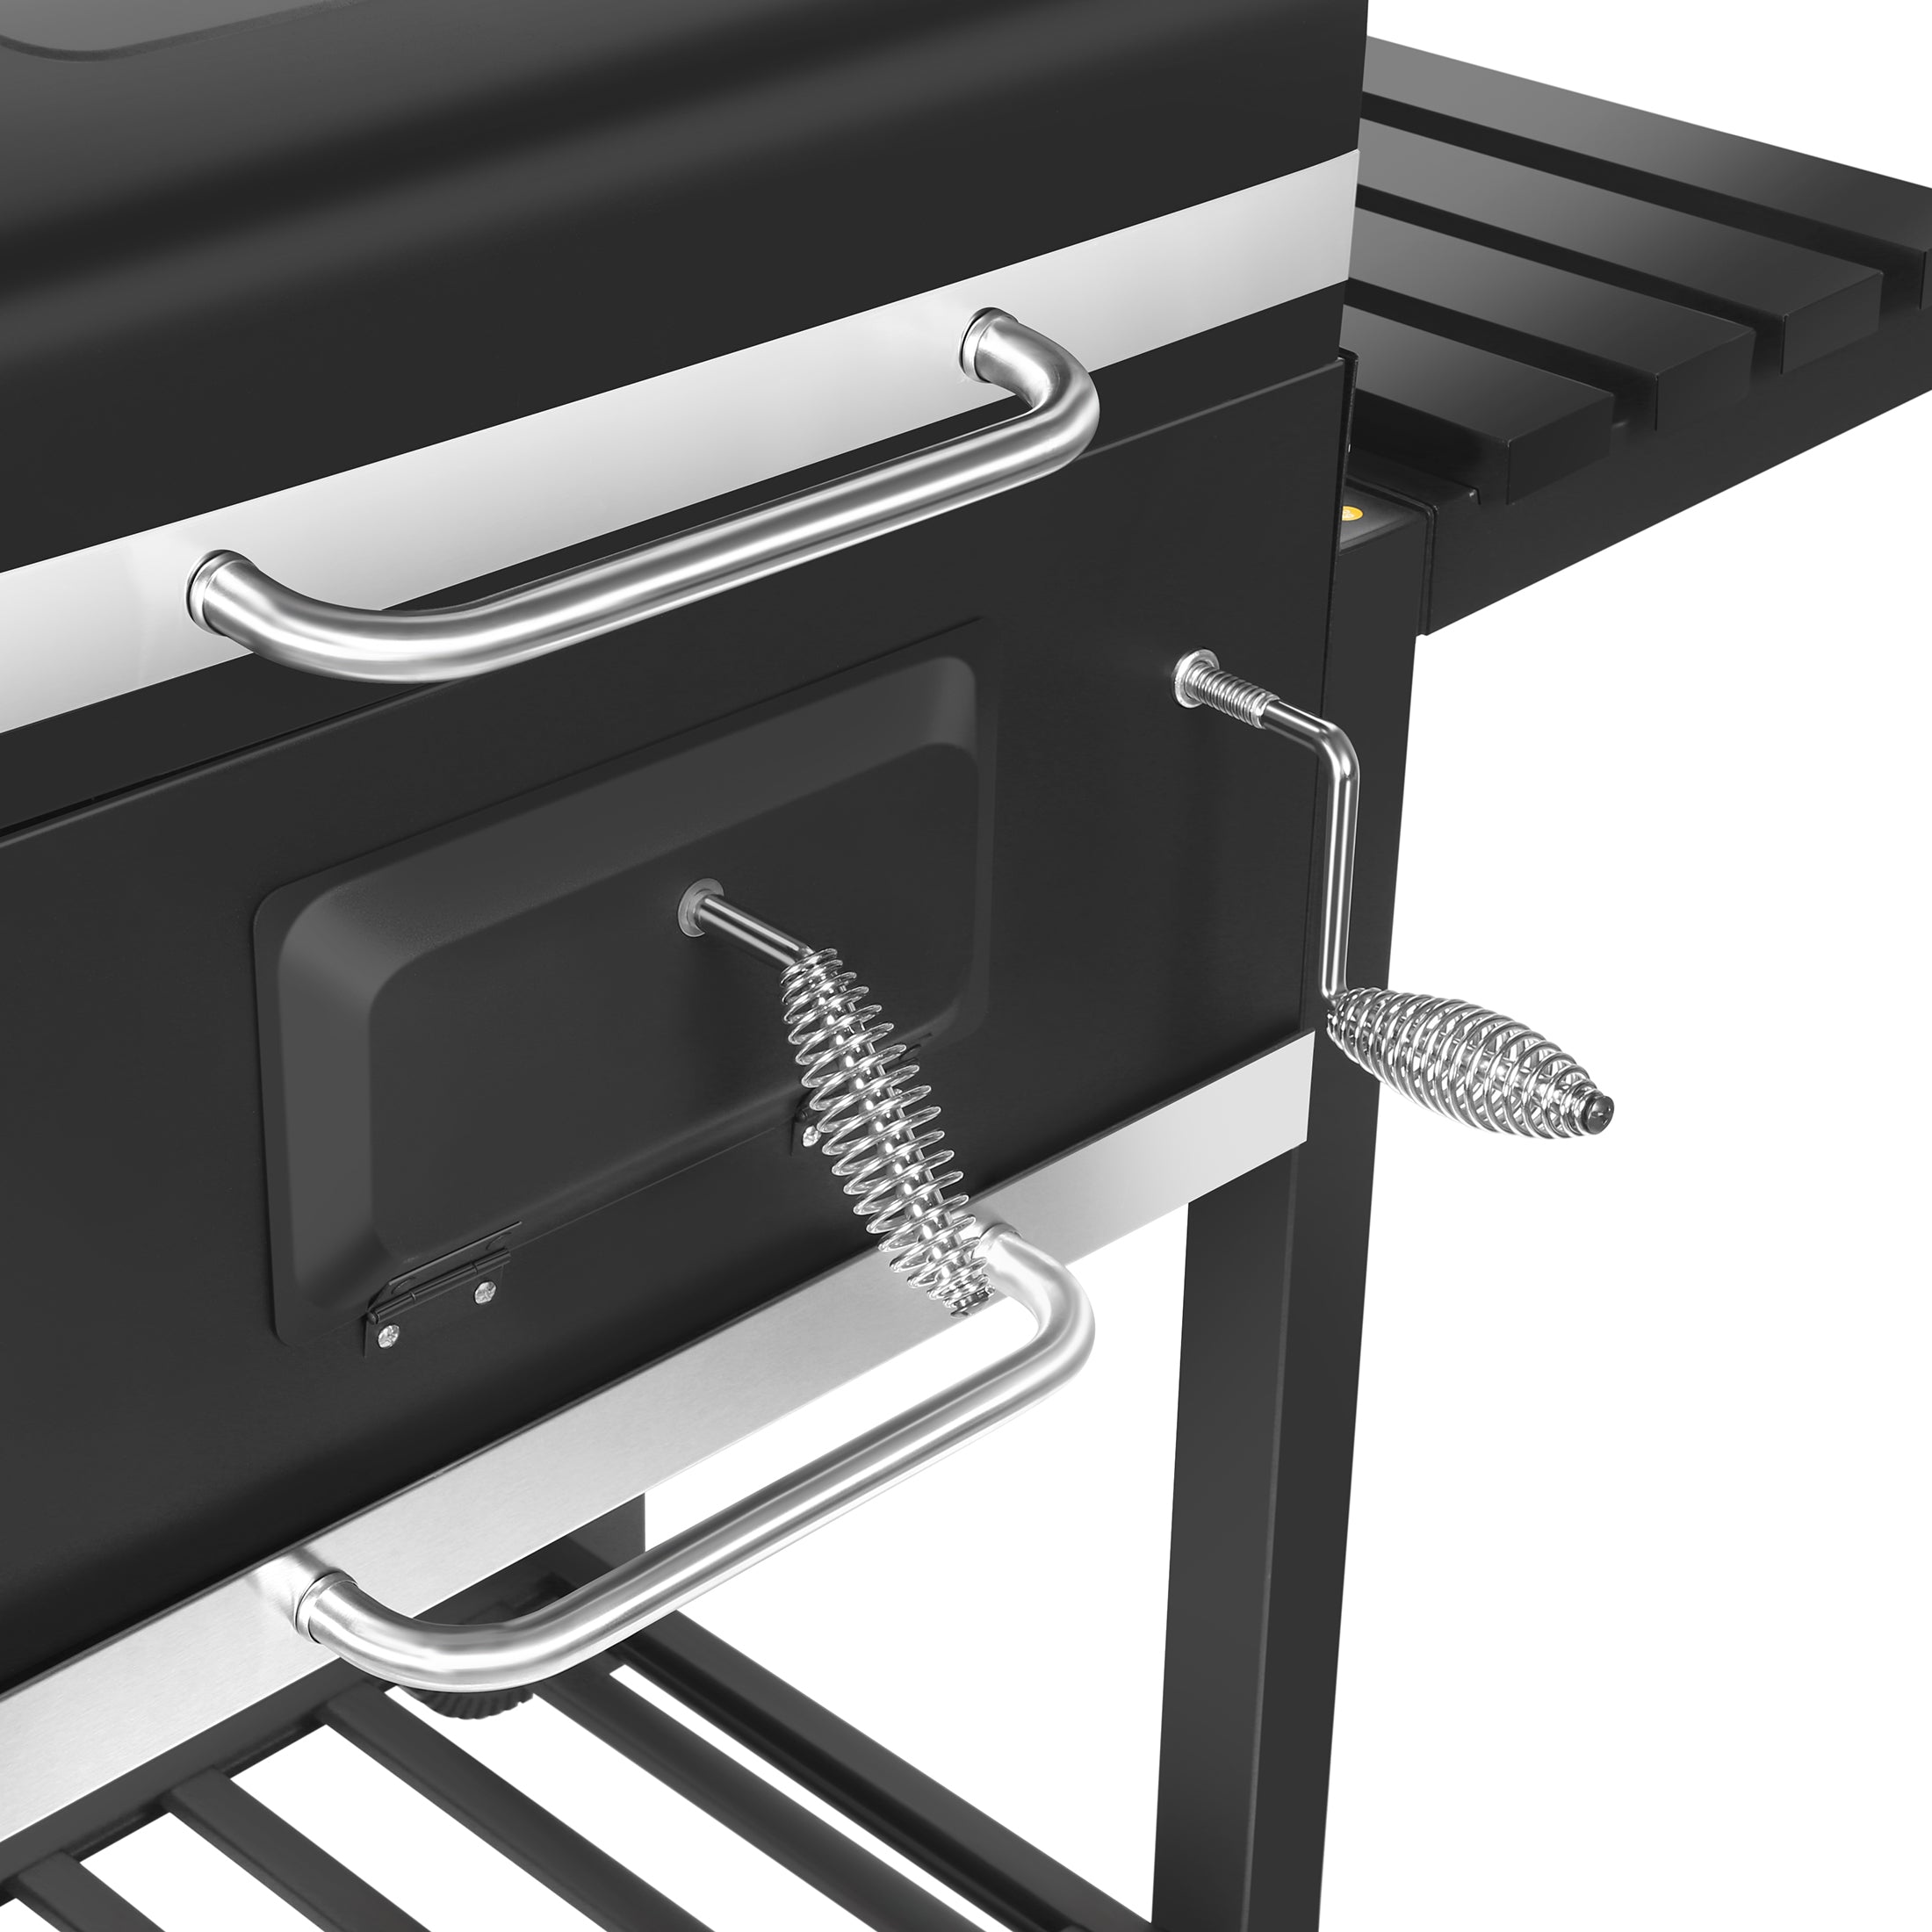 Heavy-Duty Extra-Large Charcoal Grill with Foldable Side Shelves in Black